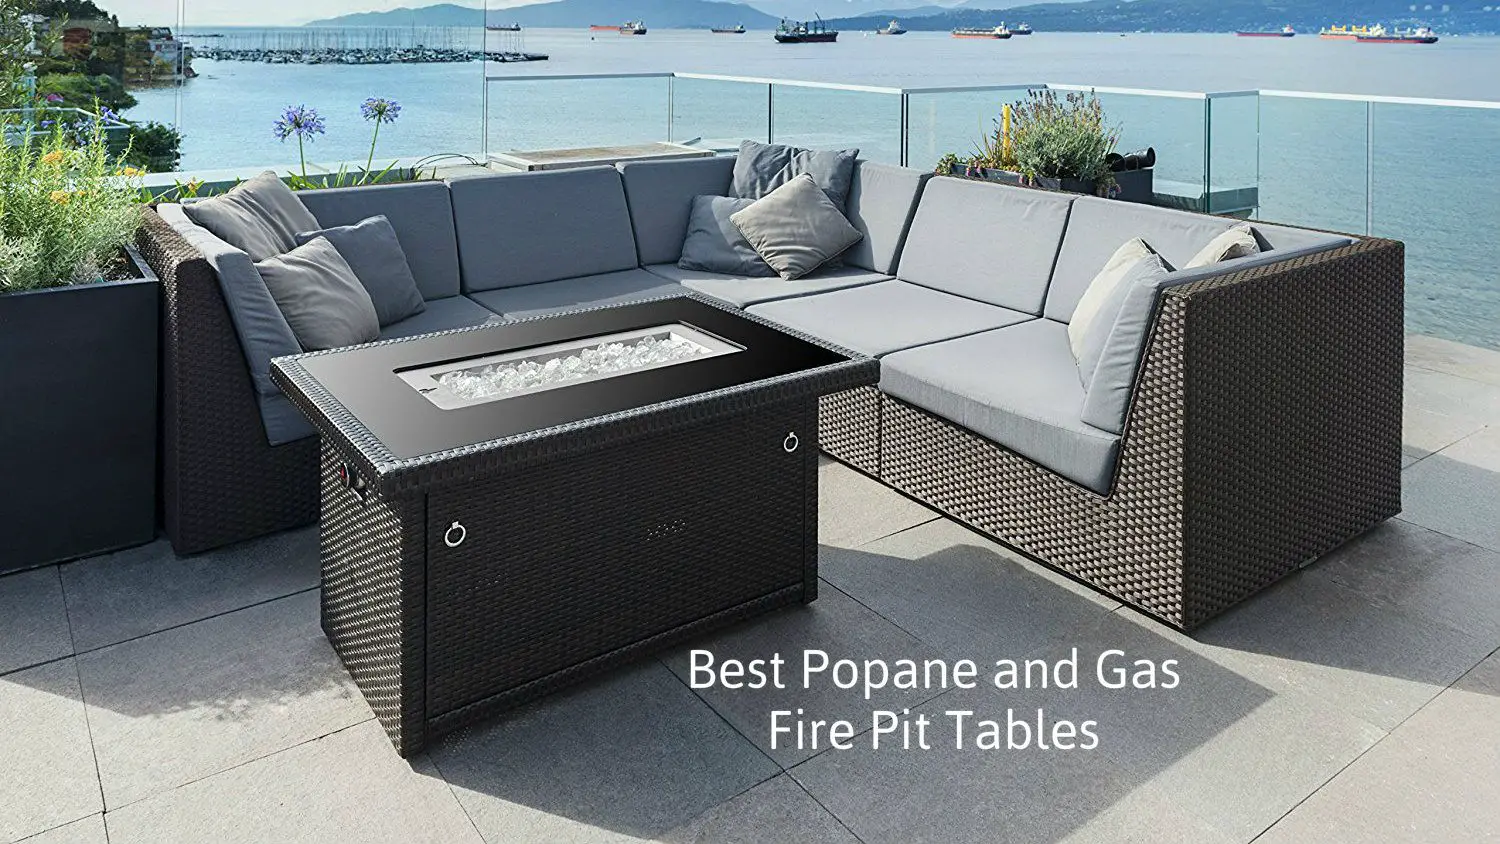 Best Propane And Gas Fire Pit Tables, Bcp Extruded Aluminum Gas Outdoor Fire Pit Table With Cover